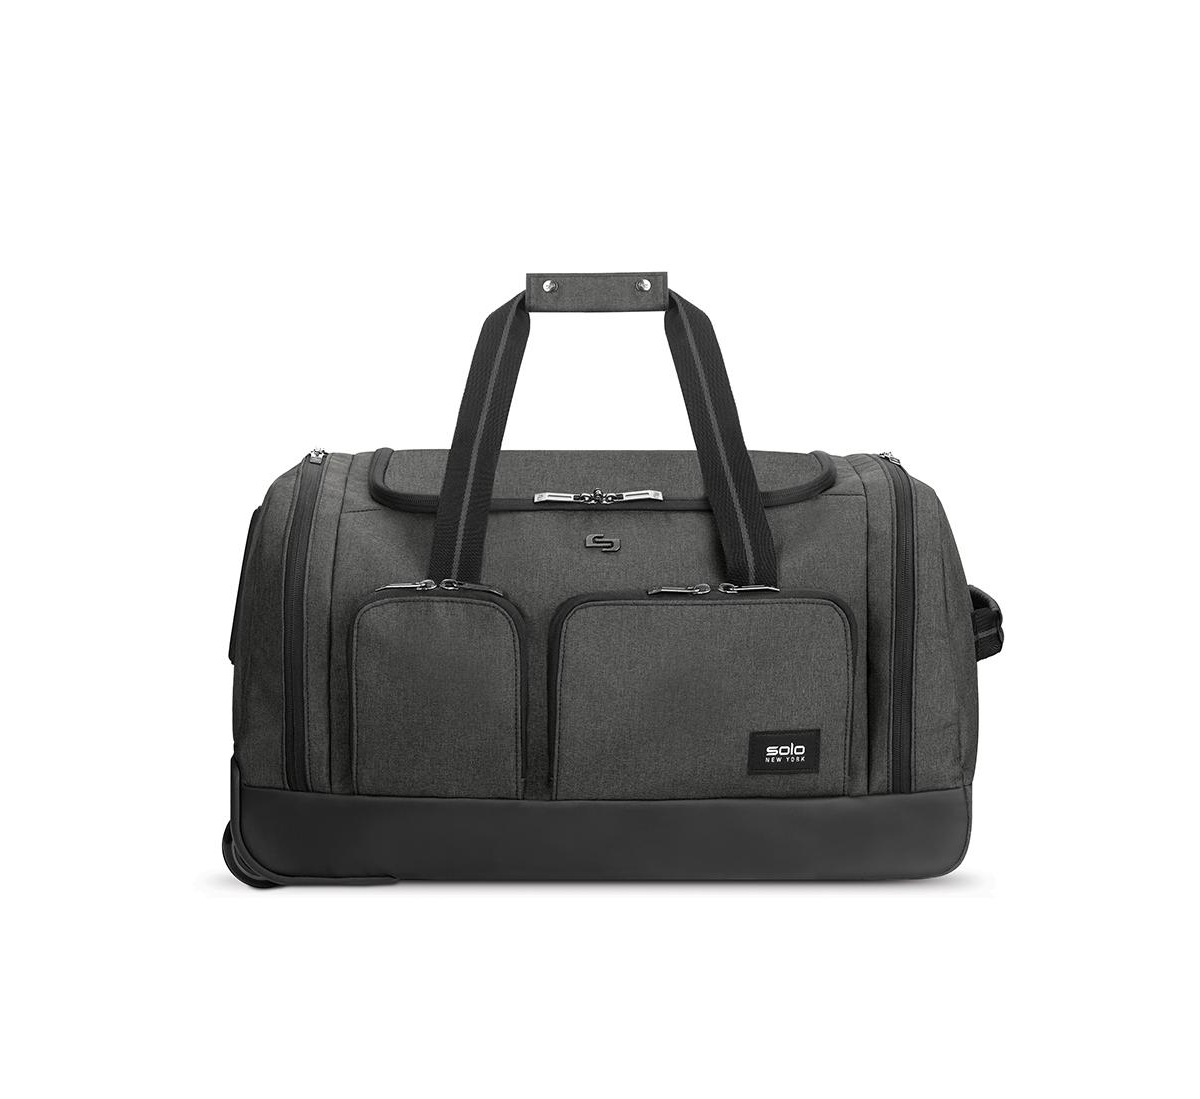 New York Leroy Carry-On Rolling Duffel Bag - Gray